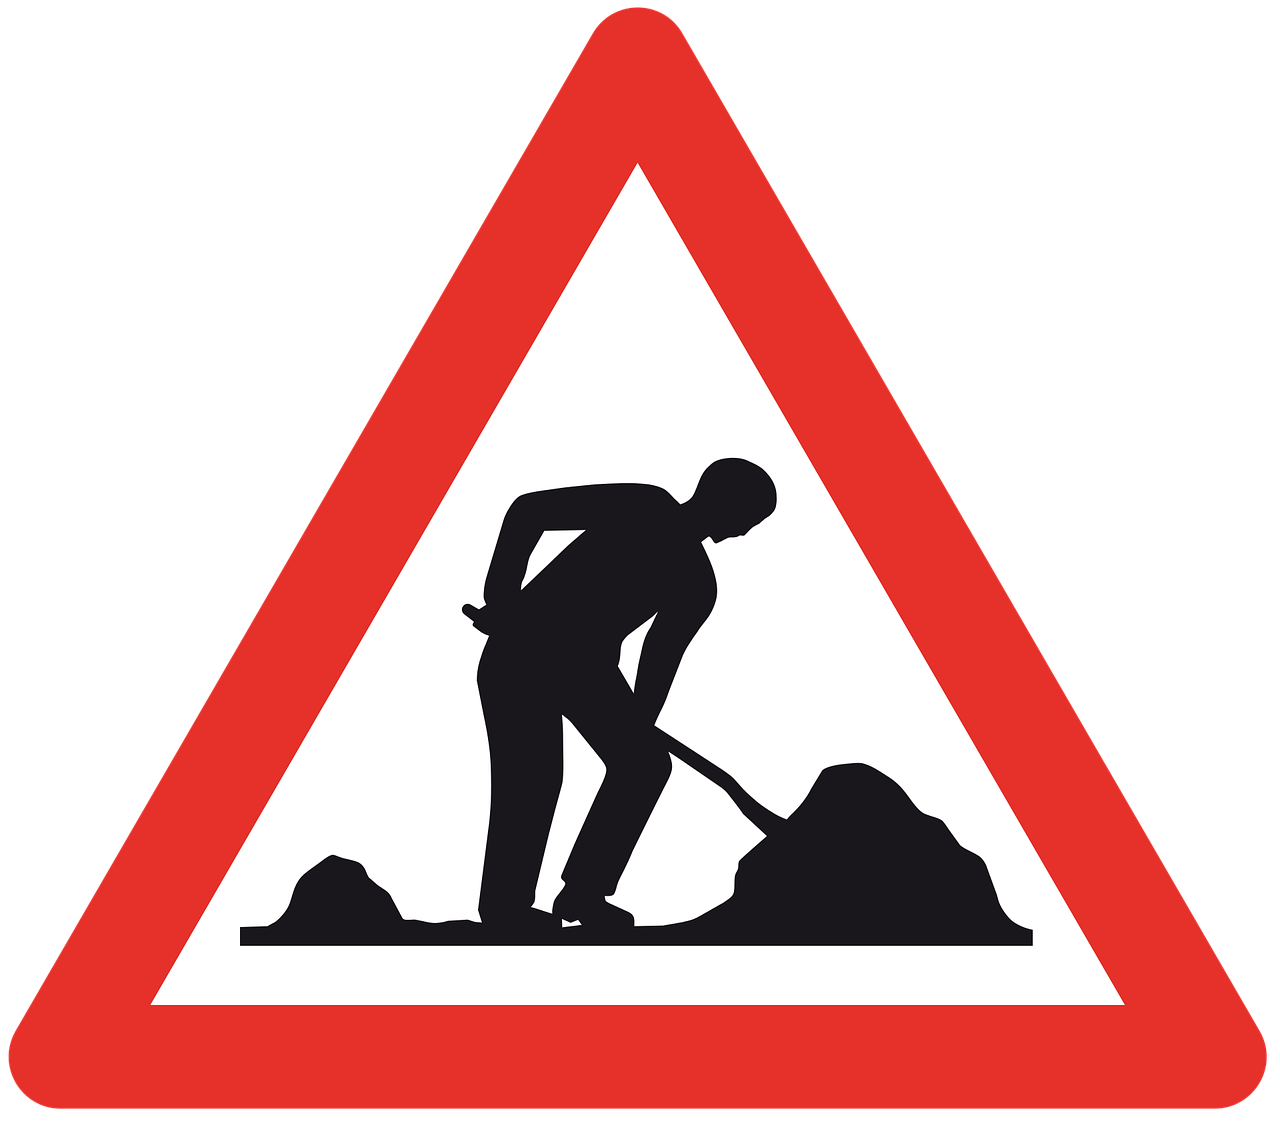 a man digging a pile of dirt with a shovel, by Odhise Paskali, pixabay, constructivism, traffic signs, logo without text, 513330673, istock